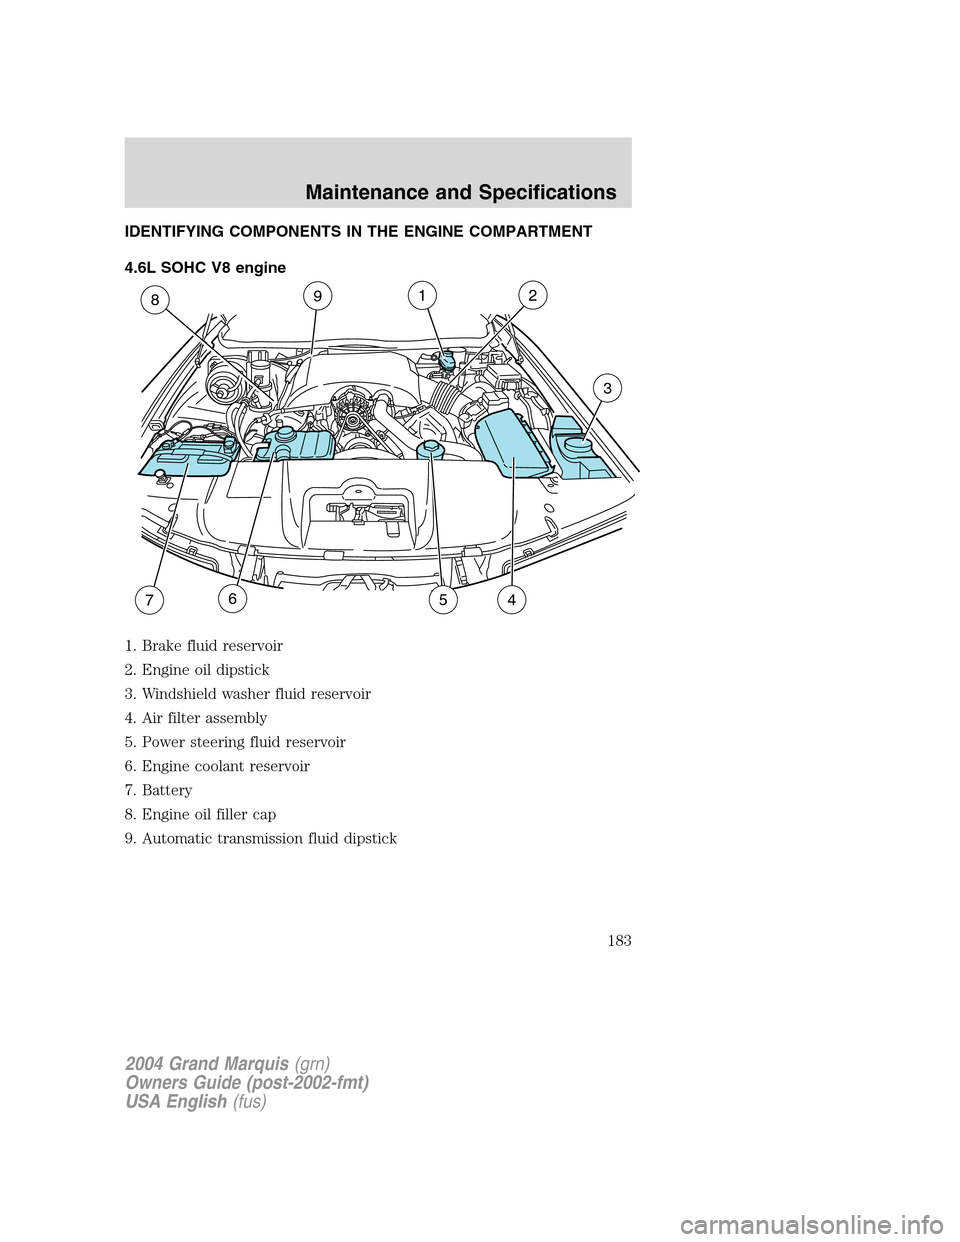 Mercury Grand Marquis 2004  Owners Manuals IDENTIFYING COMPONENTS IN THE ENGINE COMPARTMENT
4.6L SOHC V8 engine
1. Brake fluid reservoir
2. Engine oil dipstick
3. Windshield washer fluid reservoir
4. Air filter assembly
5. Power steering fluid